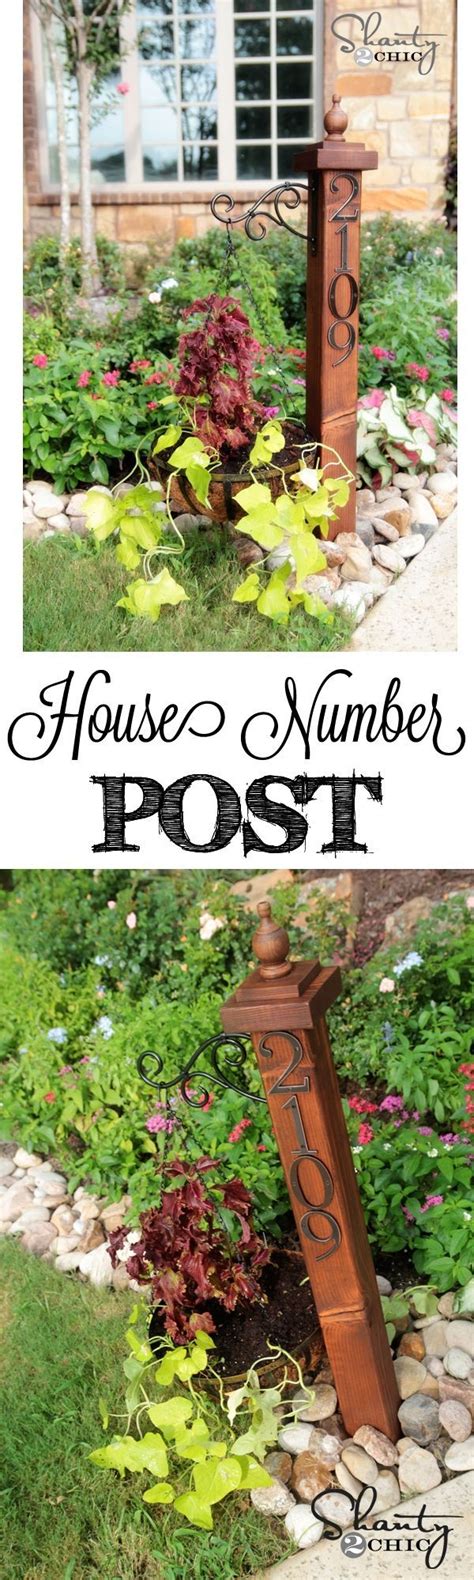 DIY House Address Numbers Post Planter by amy.shen | Garden, Garden and